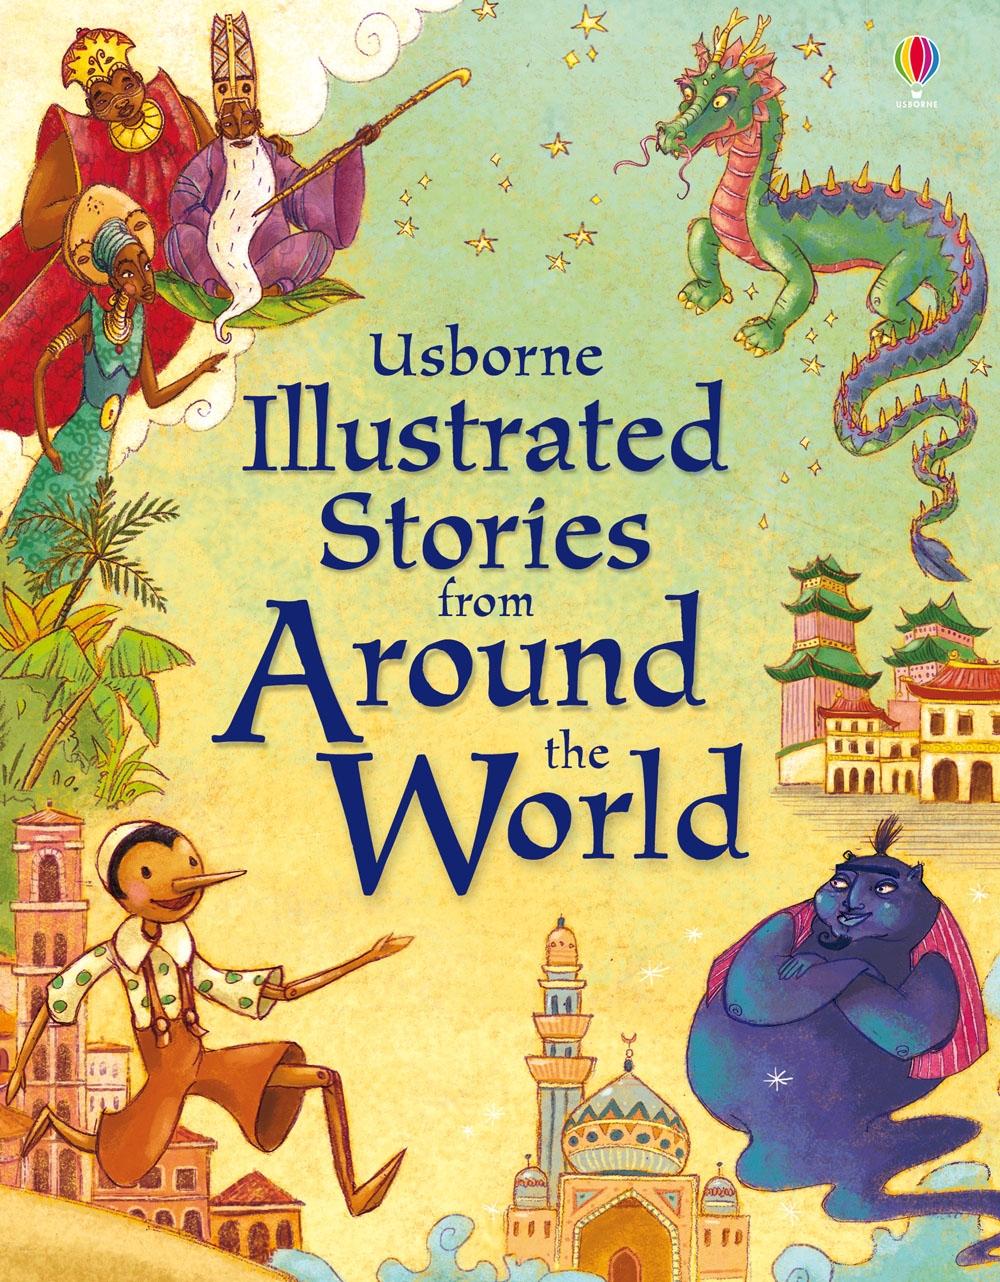 Illustrated Stories from Around the World | Lesley Sims | Buch | 336 S. | Englisch | 2010 | Usborne Publishing Ltd | EAN 9781409516491 - Sims, Lesley